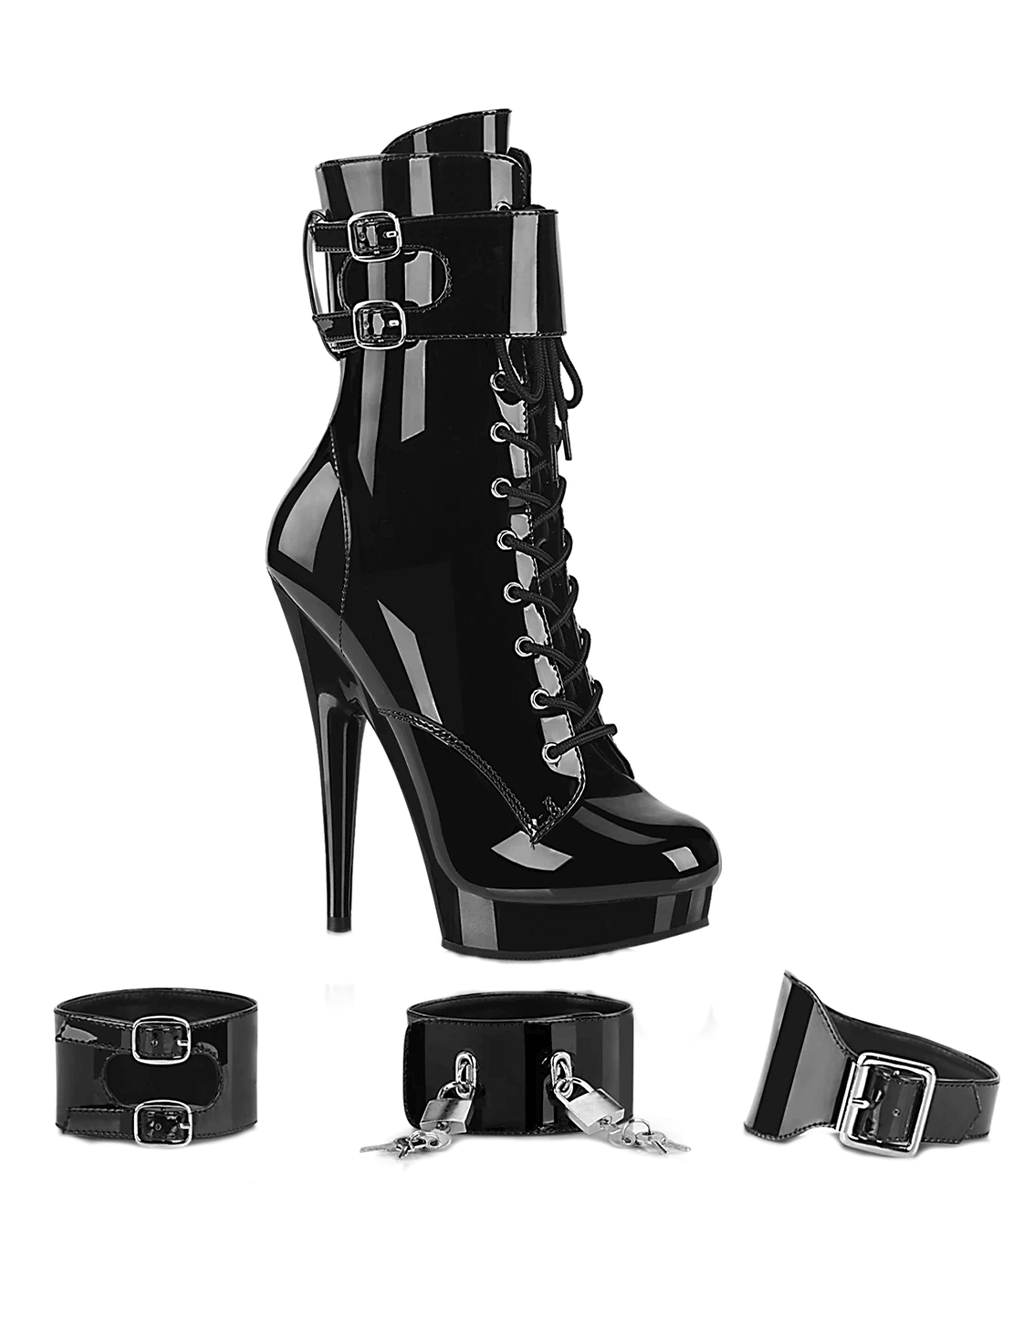 Sultry-1023 Lace Up Ankle Boot Heel With Cuffs - Black Patent/Black - With Included Cuffs